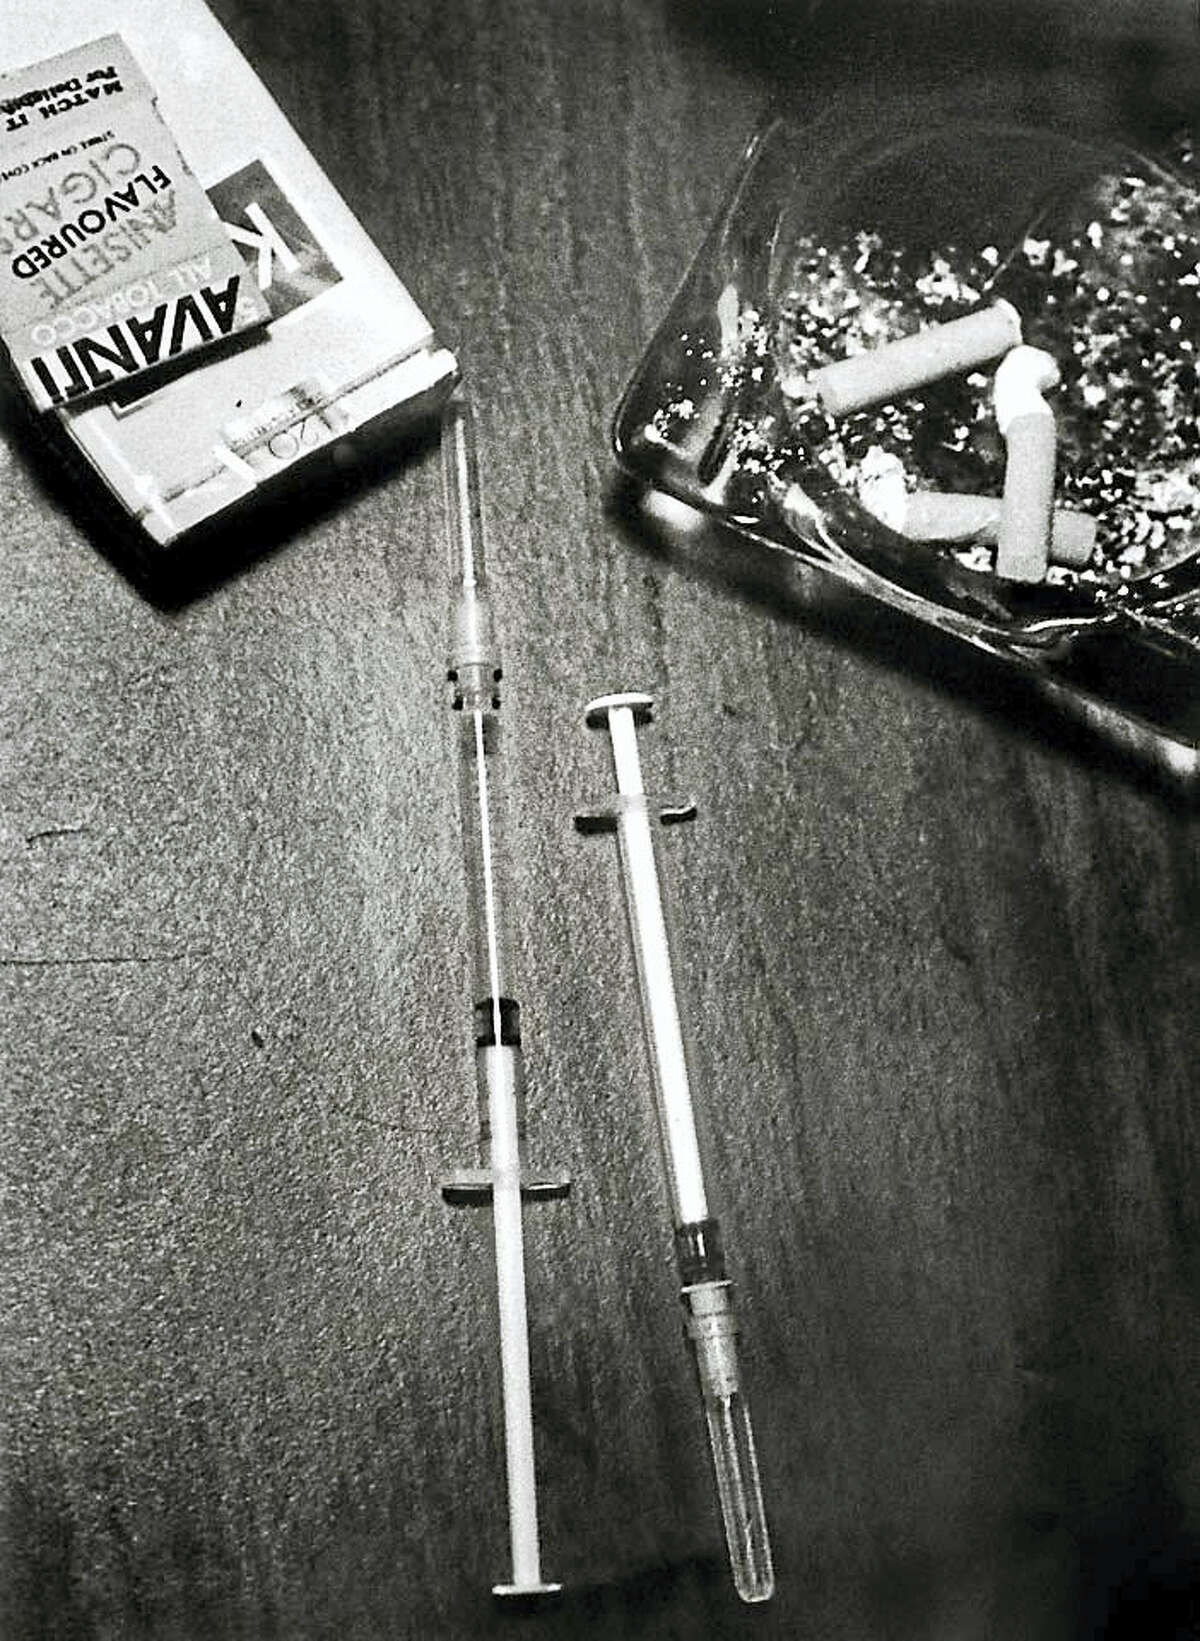 Syringes that will inject a mixture of heroin and cocaine, a.k.a., speedball, into a drug addict’s veins.